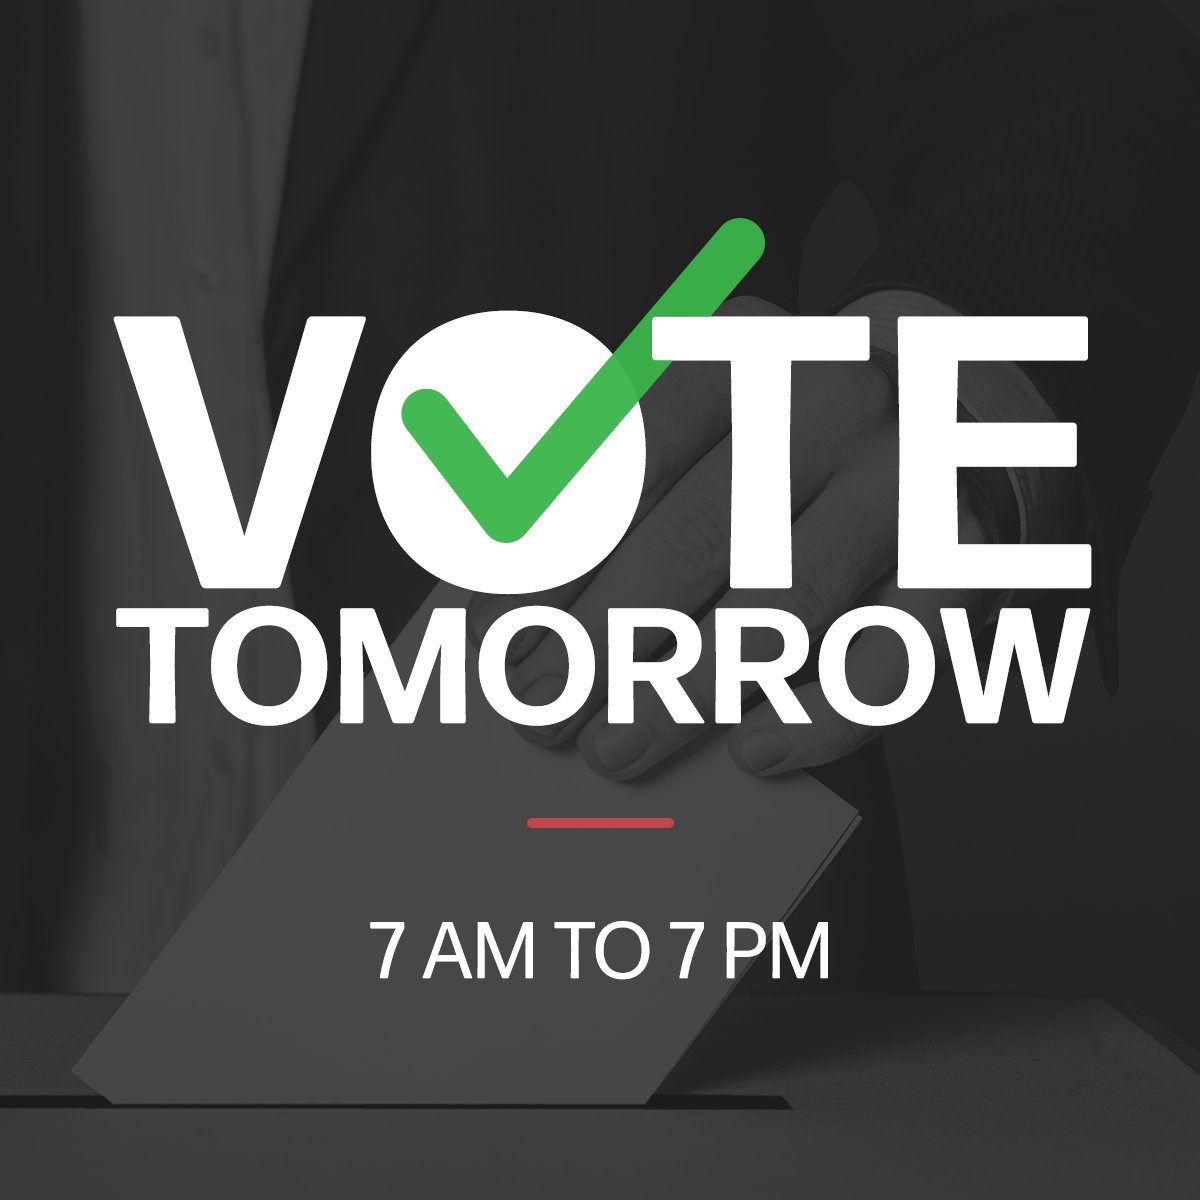 Tomorrow is Election Day! Polls are open from 7 am until 7 pm. Not sure where your polling location is? Find your polling location here: marshallforalabama.com/findmypollingl…